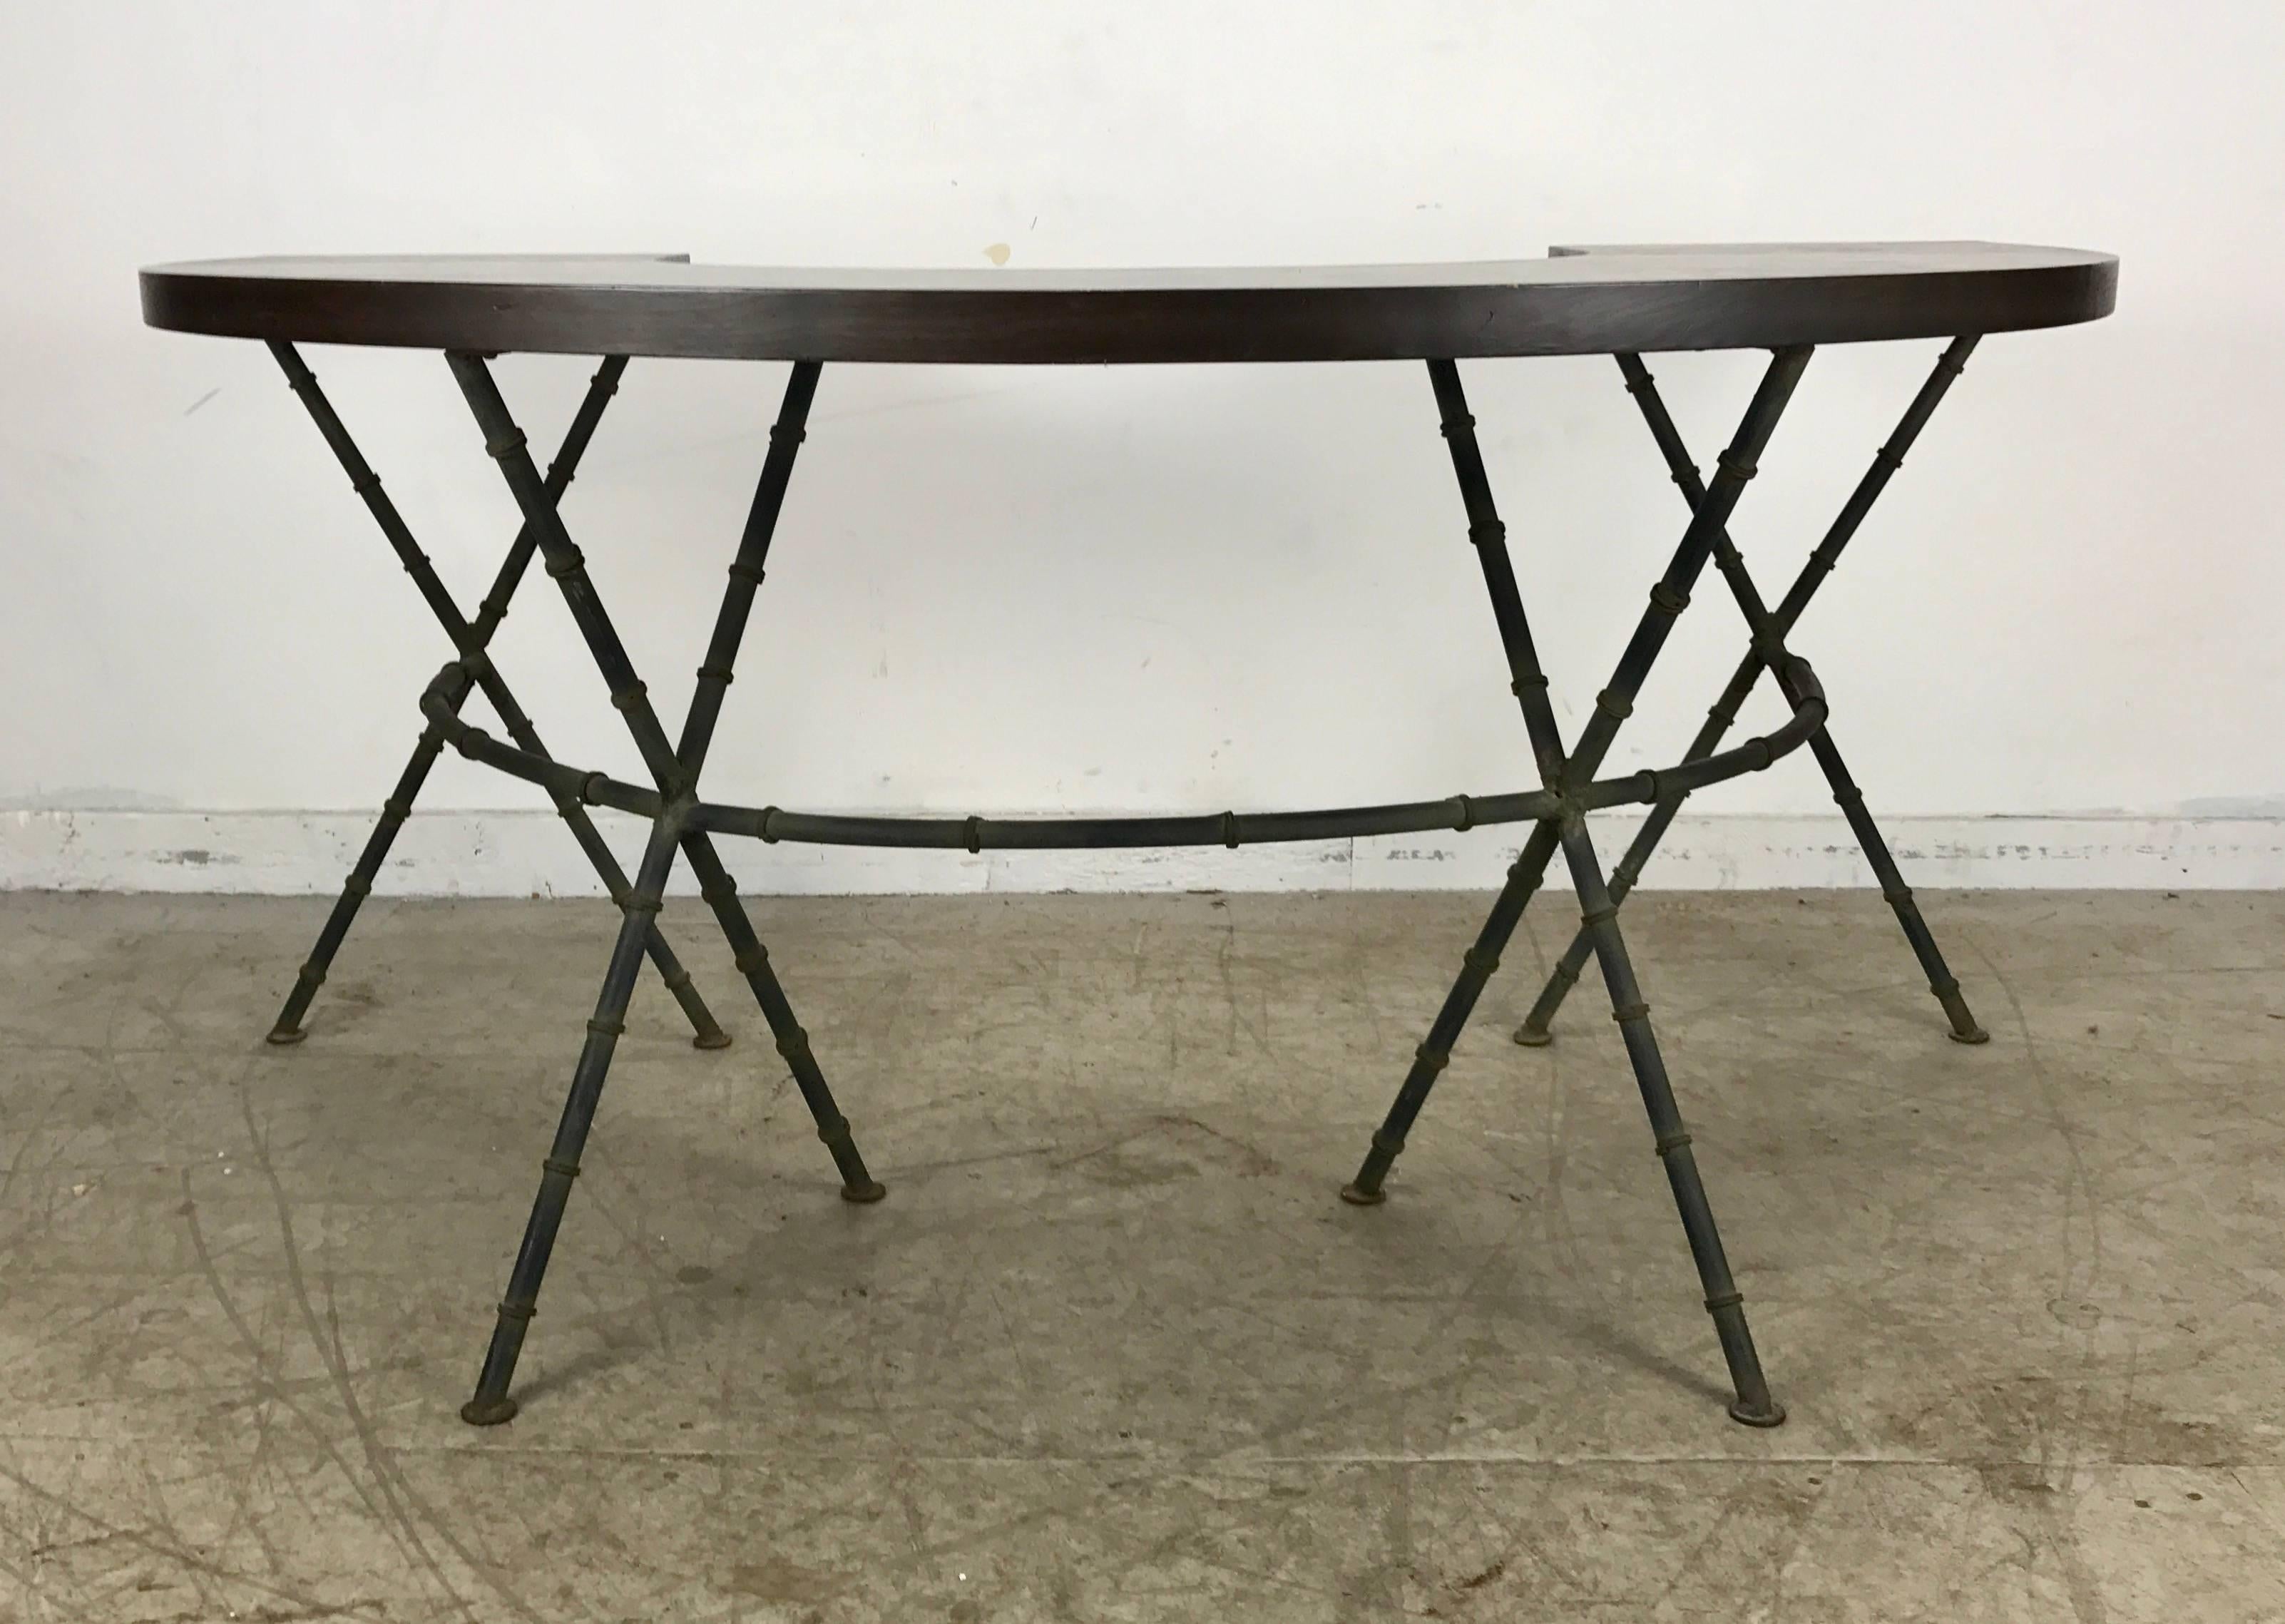 Half circle faux bamboo desk / wine tasting table manner of Jacques Adnet. Stunning design, wonderful Verde green bronzed patina. Hand delivery available to New York City or anywhere en route from Buffalo, NY.